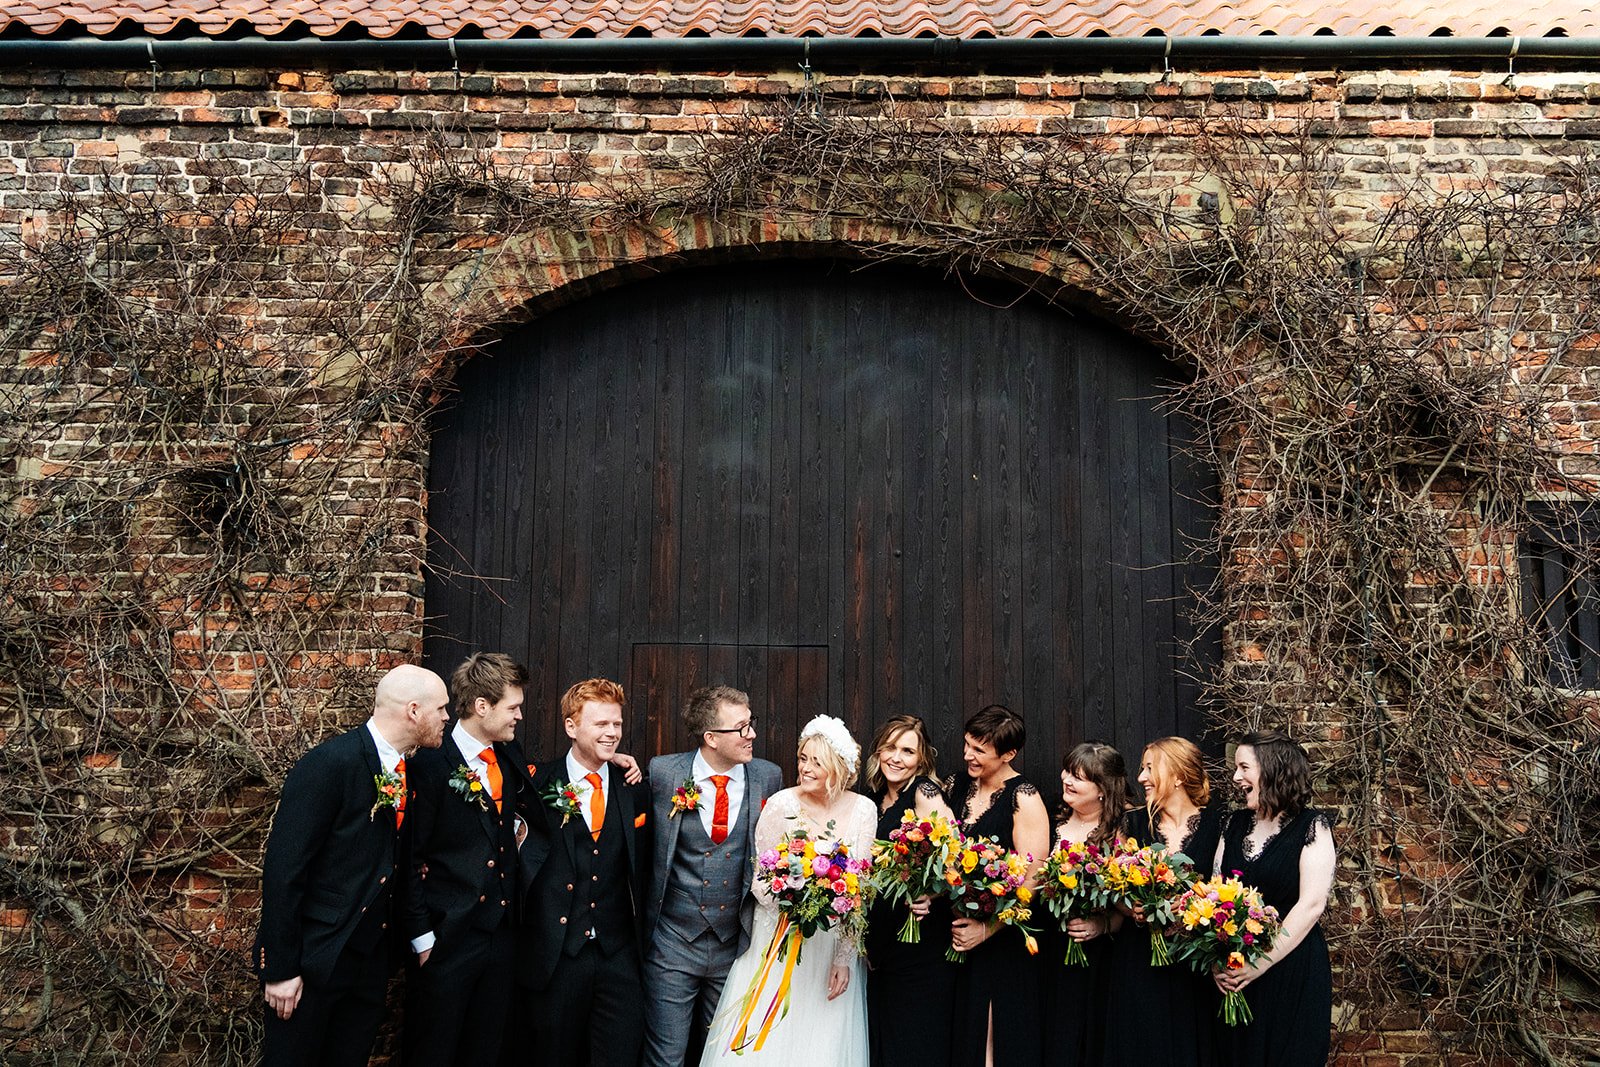 group shot of bride, groom, bridesmaids and groomsmen. The woman are wearing black dresses and have colourful flowers. Everyone laughing. the normans York wedding